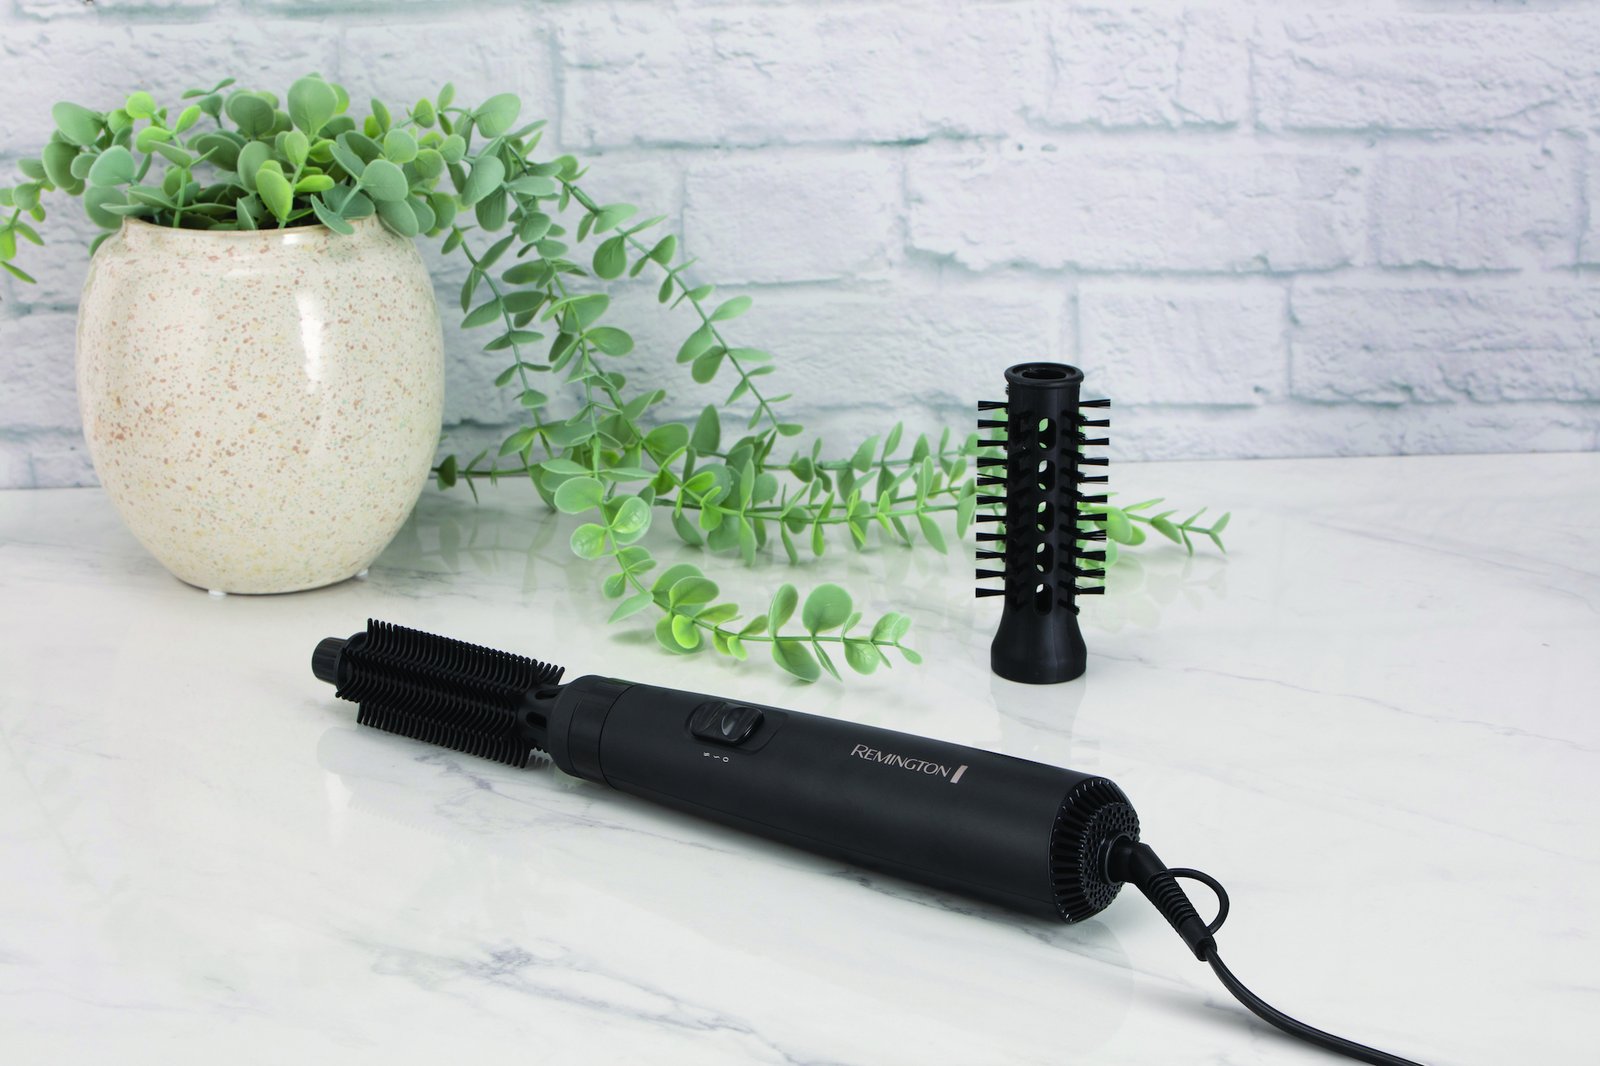 REMINGTON Blow Dry & Style Airstyler 400W 1 st